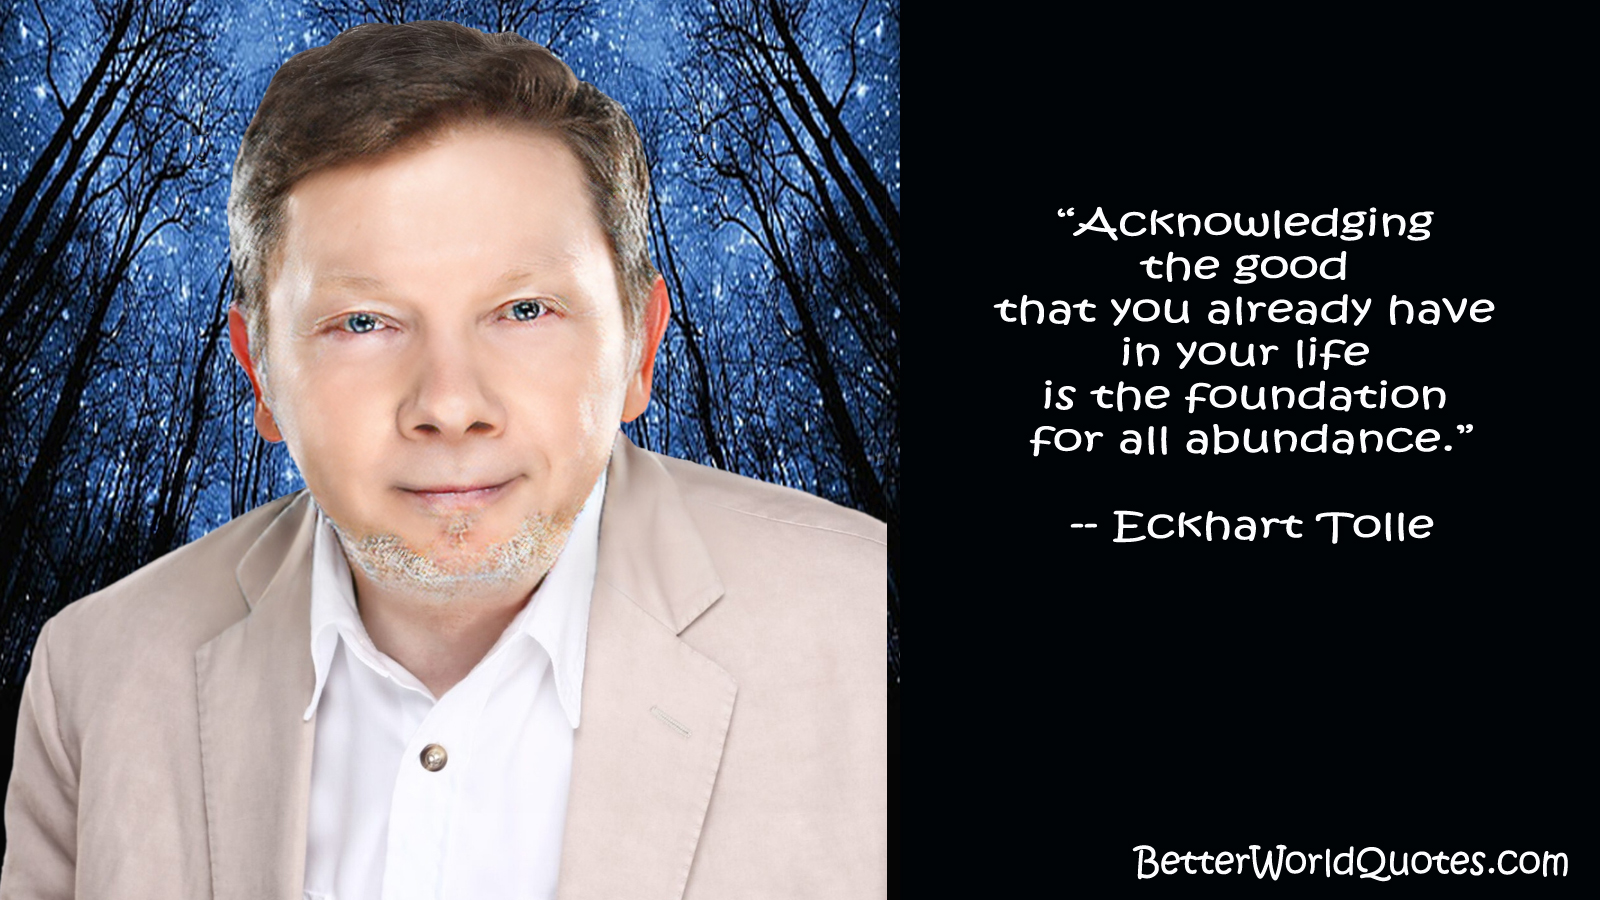 Eckhart Tolle: Acknowledging the good that you already have in your life is the foundation for all abundance.